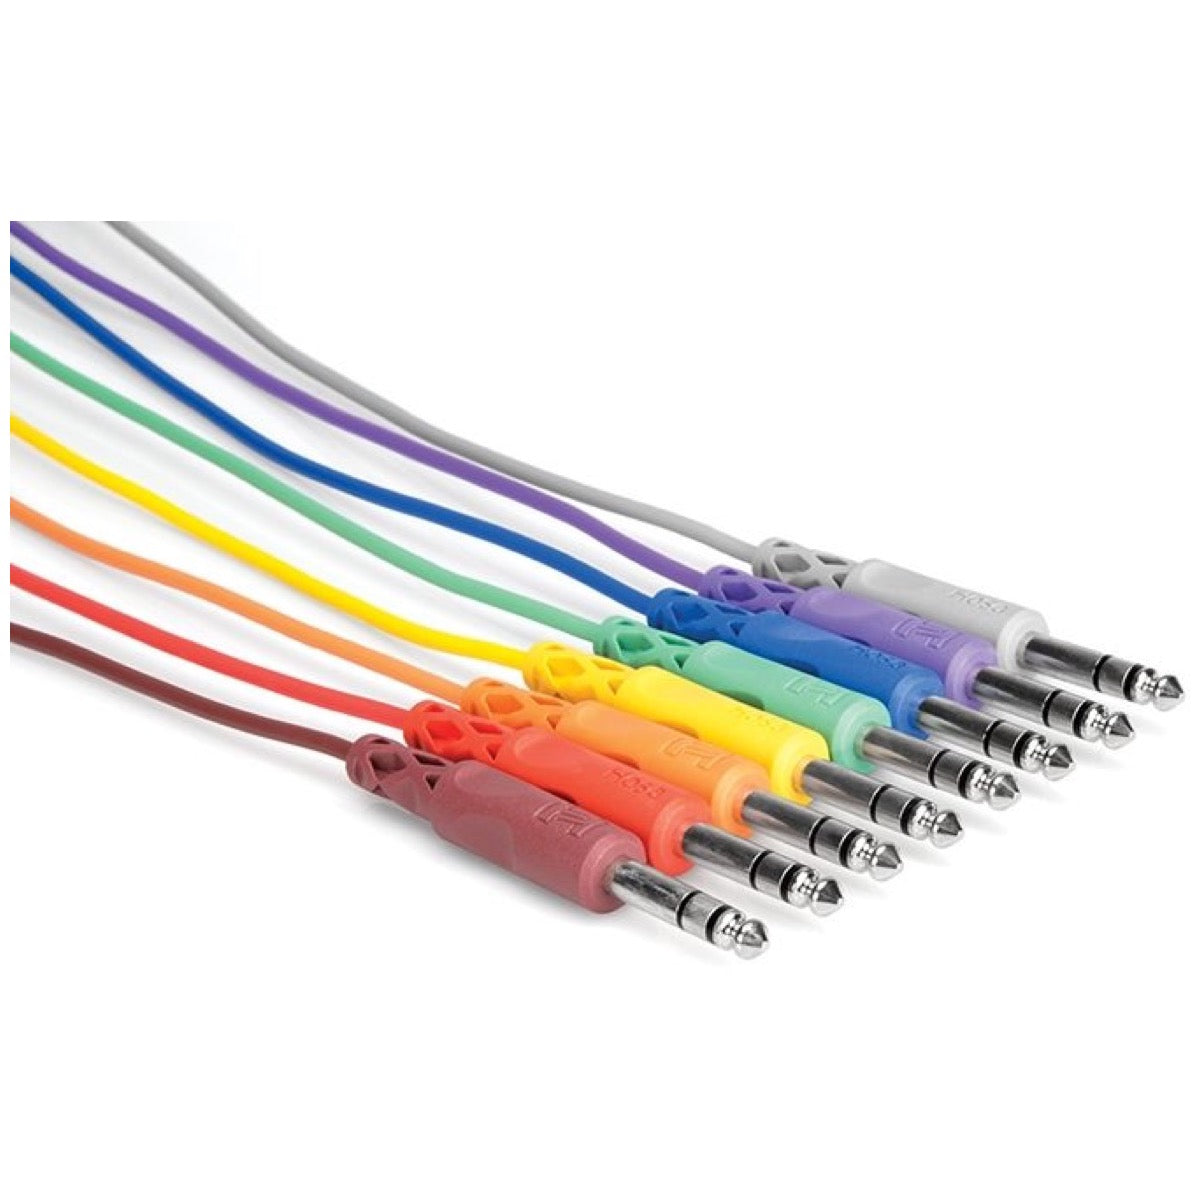 Hosa CSS845 1/4 Inch Patch Cables, 8-Pack, 1.5 Foot